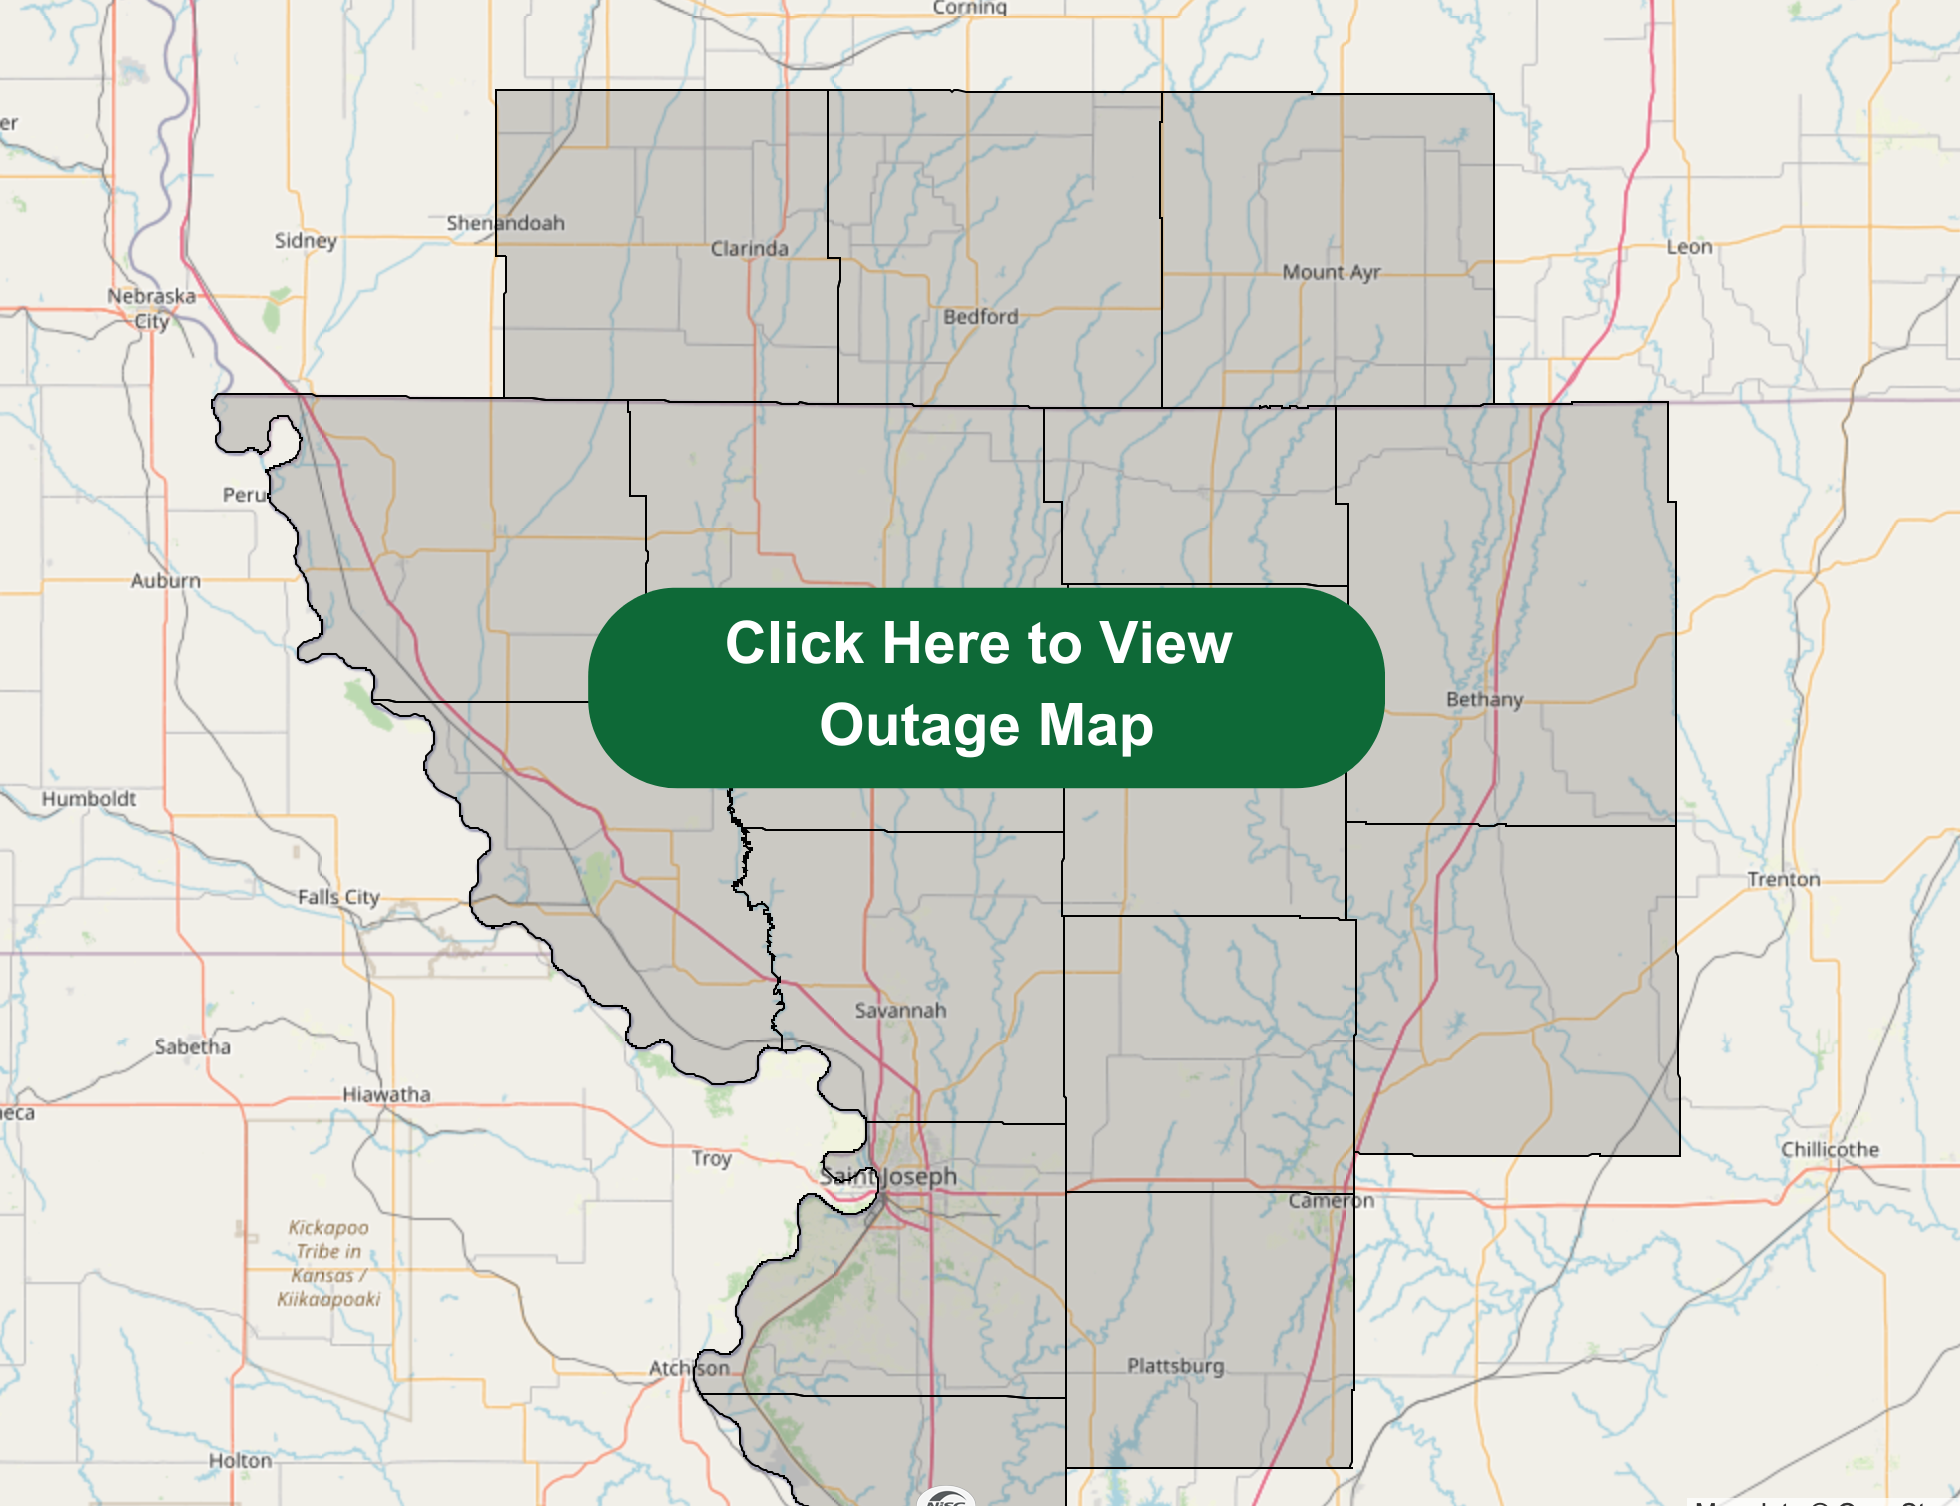 Outage Map